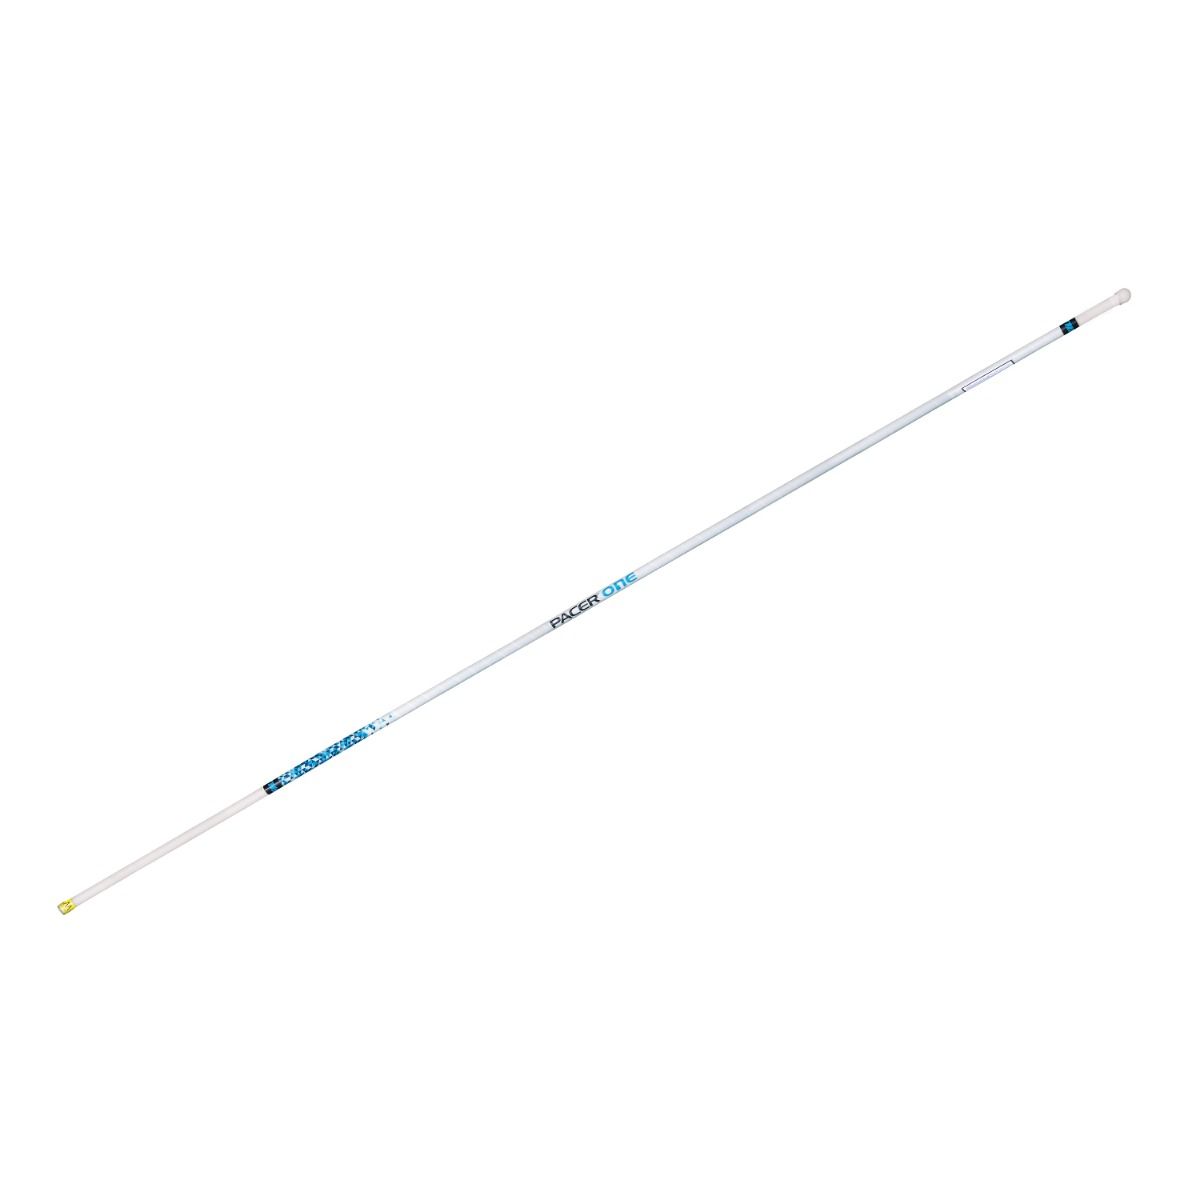 Gill 10' 6" Pacer One Vaulting Pole